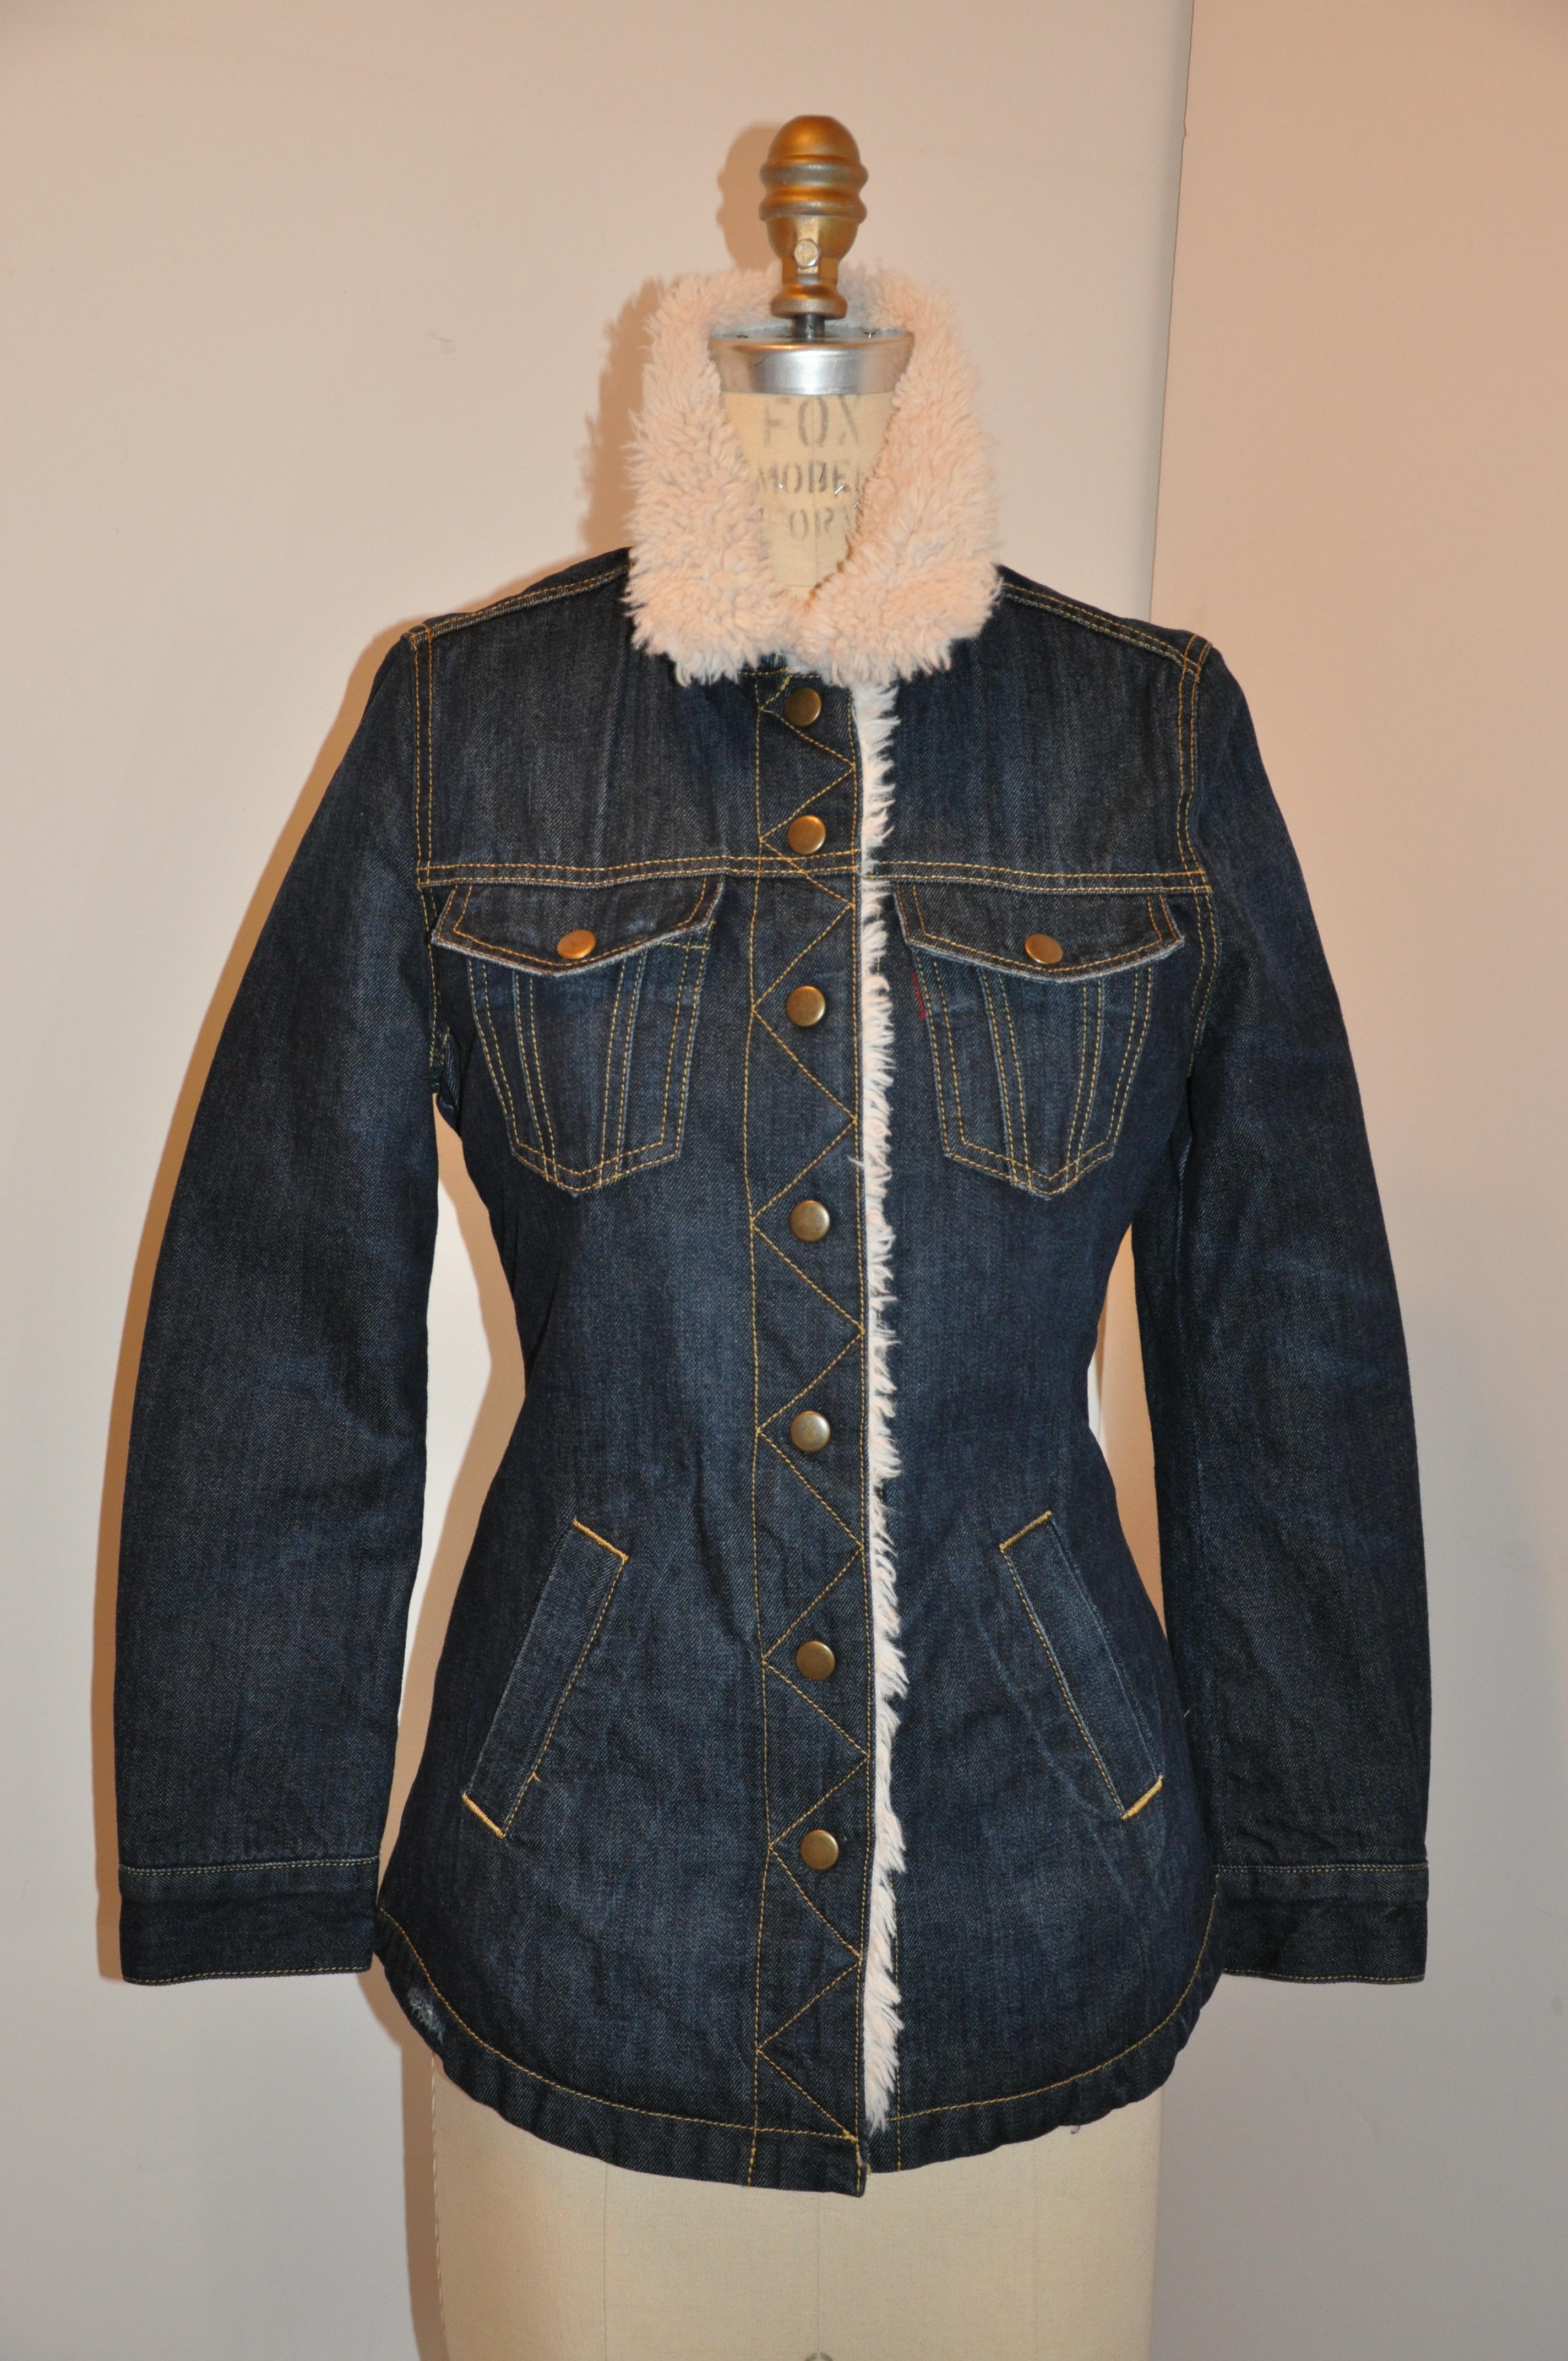 Levi faux fur-lined distressed navy denim snap-front collar with scallop hemline jacket has 7 snap closure in front accented with two patch pockets as well as two set-in pockets in front. Detailed top-stitching throughout. Shoulders measures 15